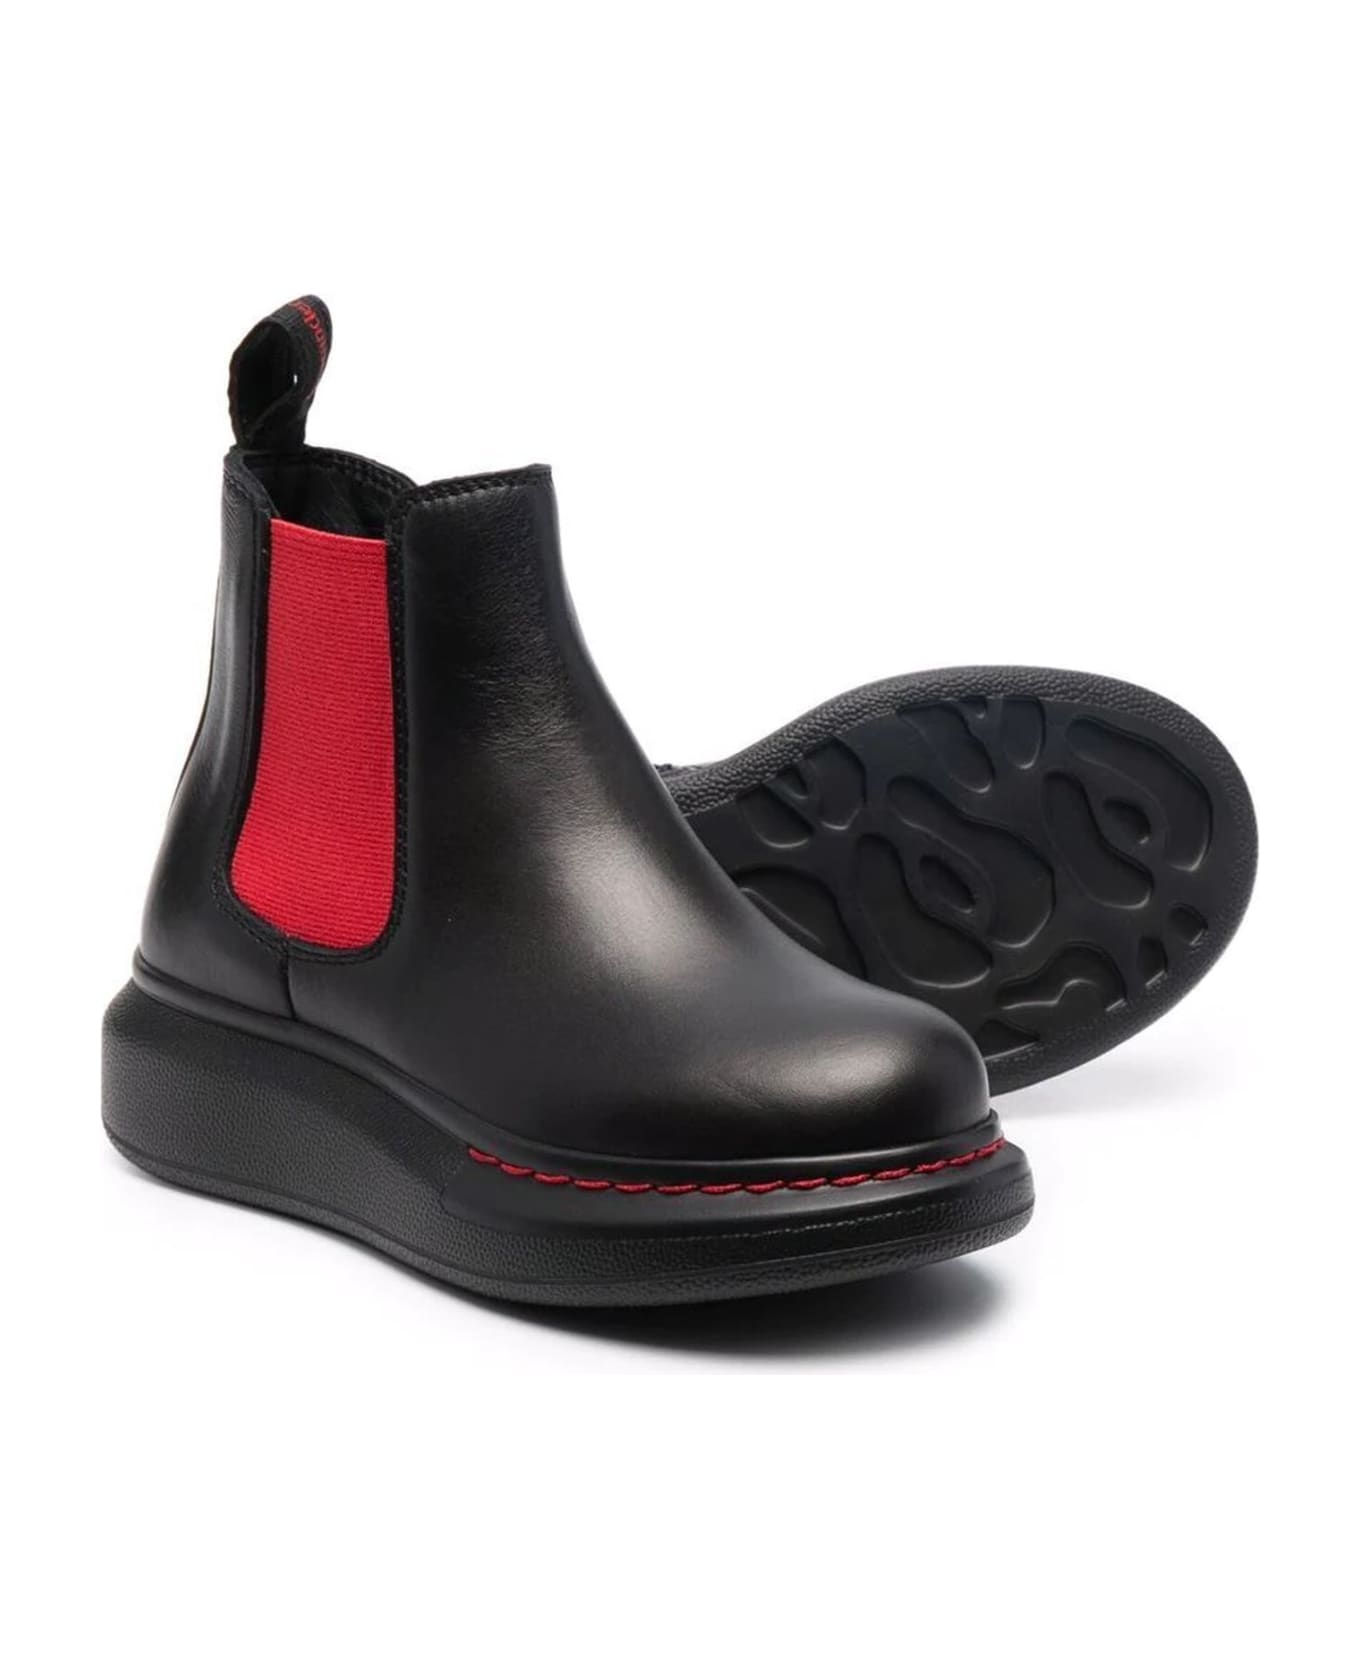 Alexander McQueen Black Leather Ankle Boots - BLACK